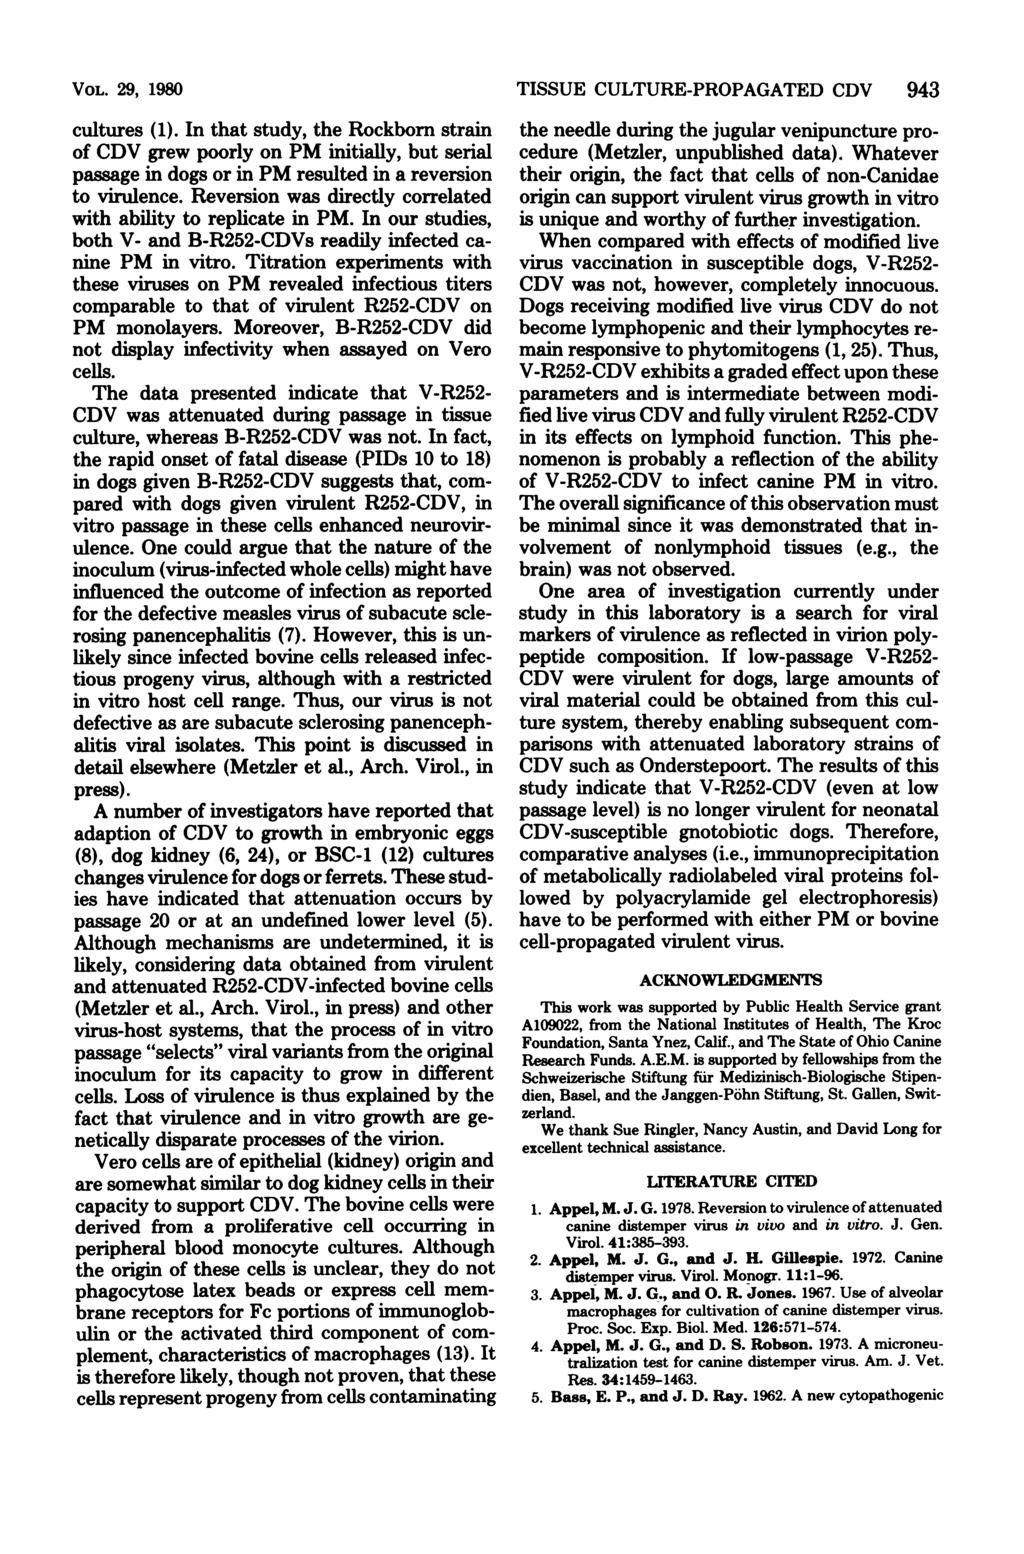 VOL. 29, 1980 cultures (1). In that study, the Rockborn strain of CDV grew poorly on PM initially, but serial passage in dogs or in PM resulted in a reversion to virulence.